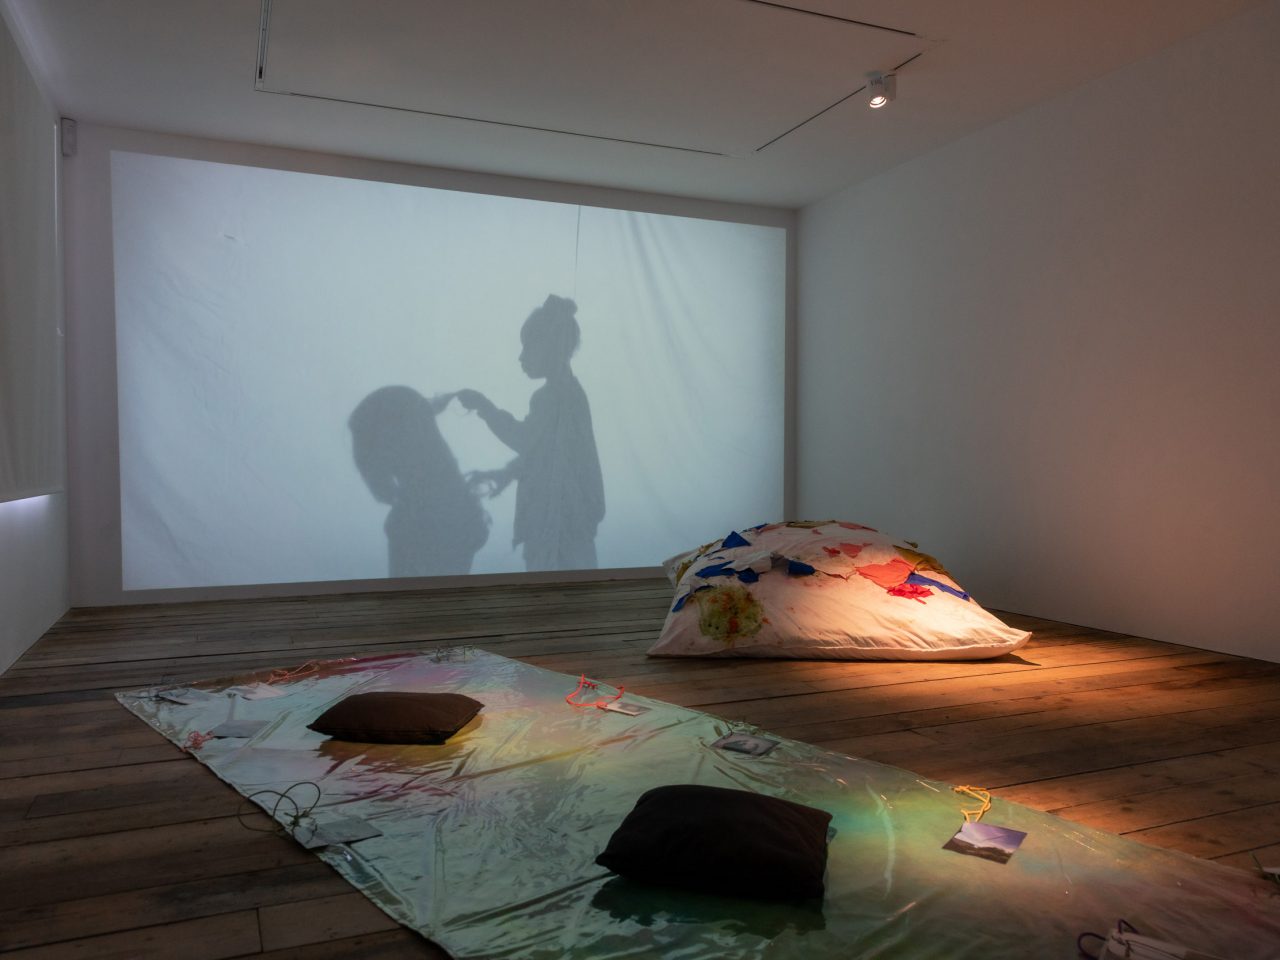 Gallery four with projection of two children, one combing another's hair